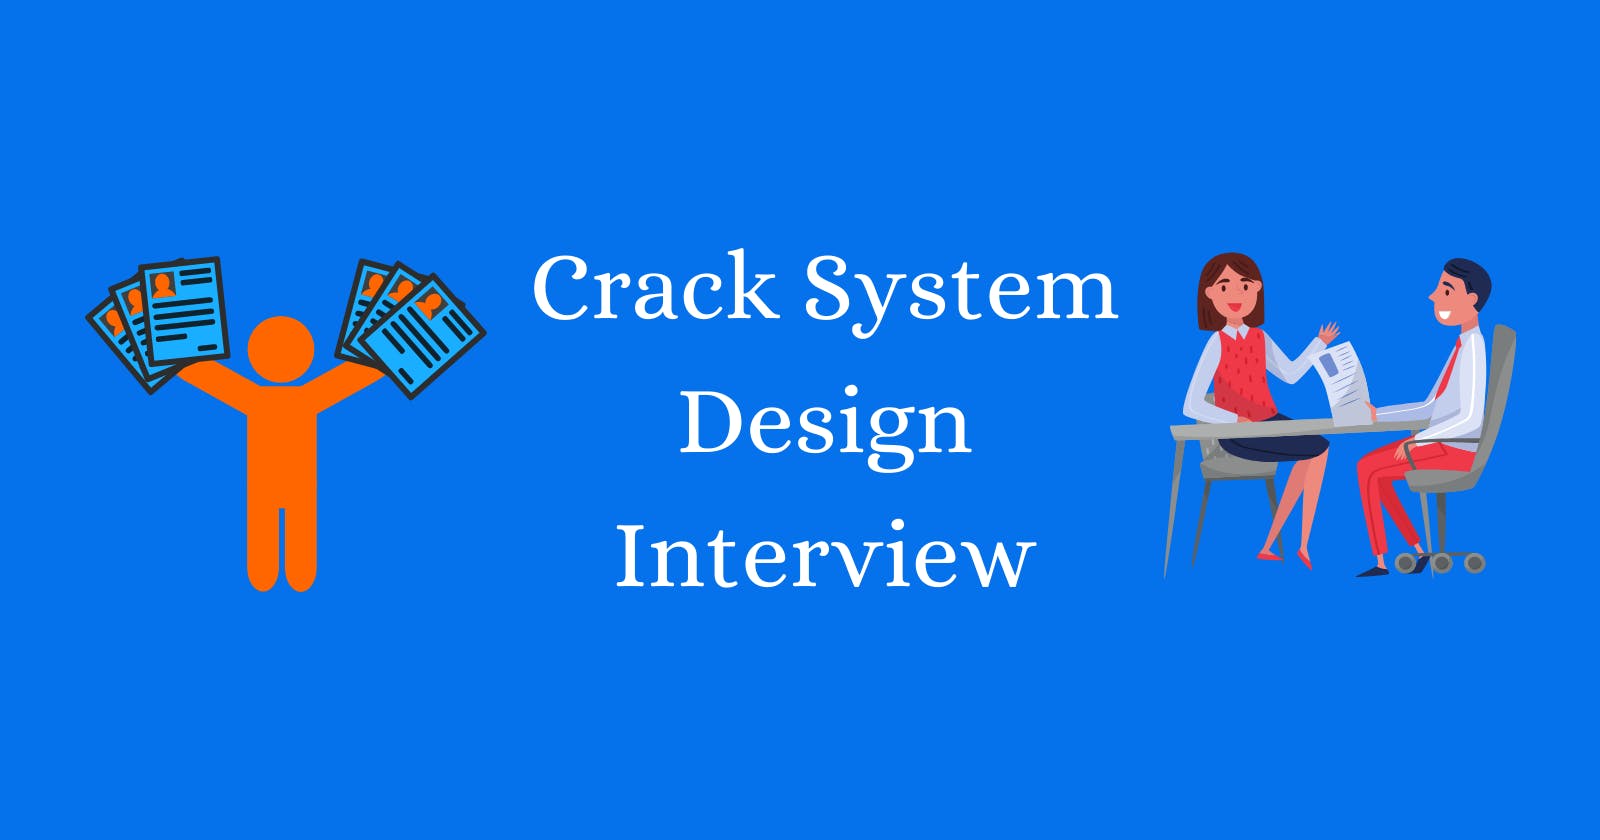 Resources for cracking your system design interview